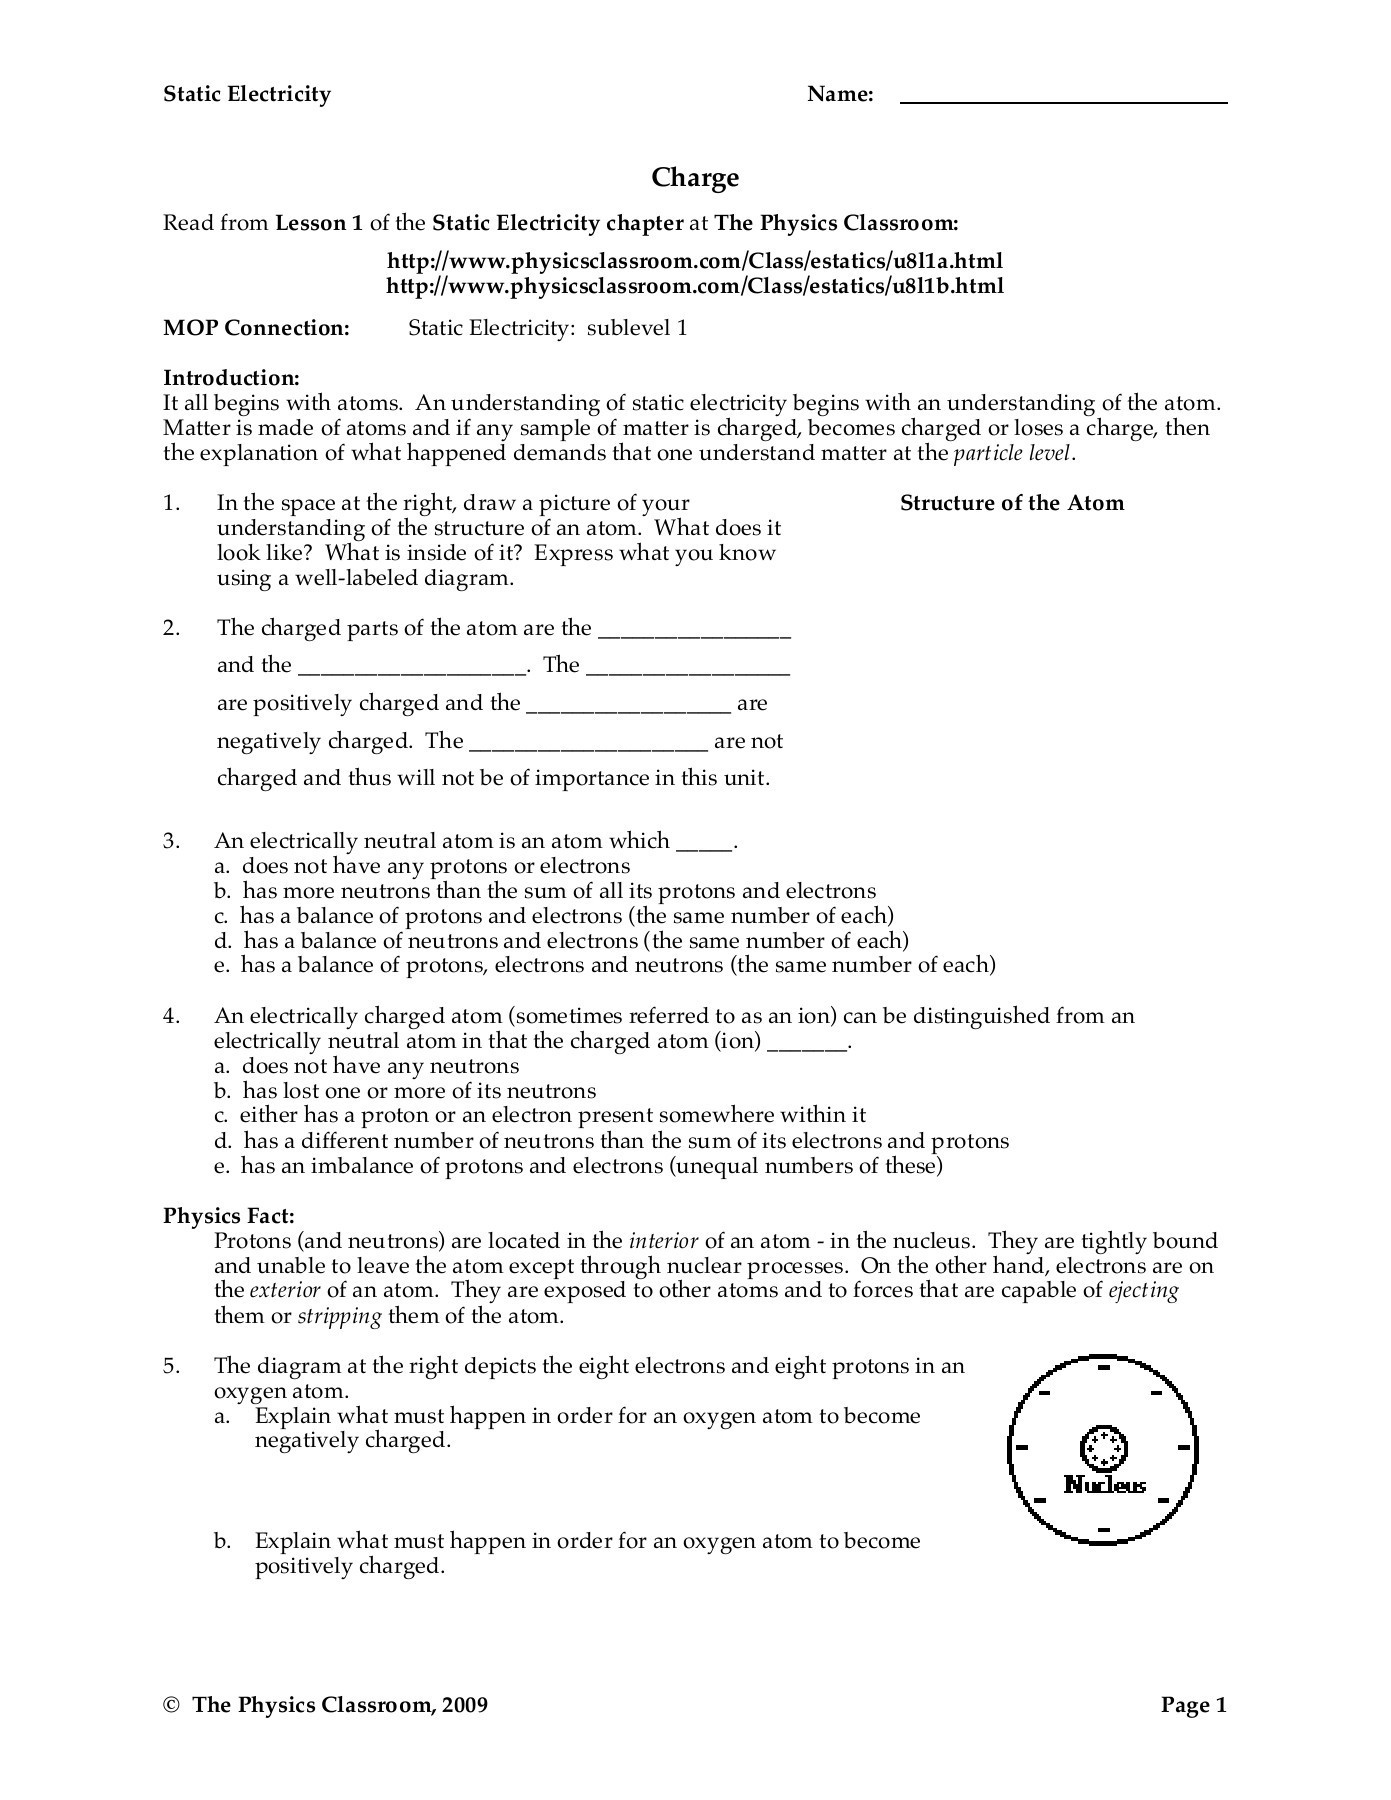 Static Electricity Worksheet Answers Charge Physics Pages 1 18 Text Version